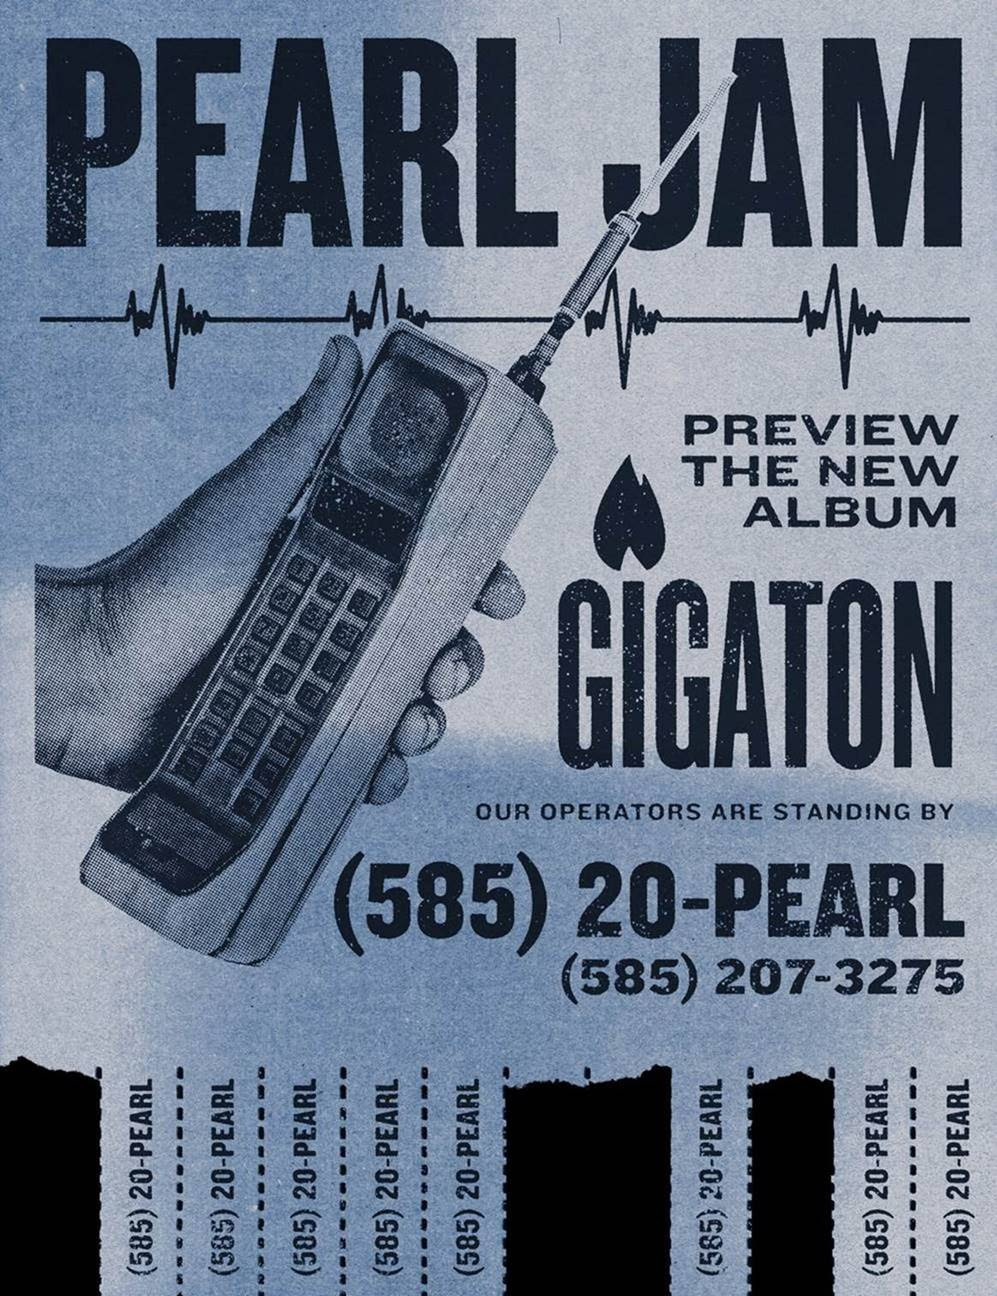 Pearl Jam Shares Hotline to Get Early Listen at <i></noscript> Gigaton</i>” title=”unnamed-1584990415″ data-original-id=”352125″ data-adjusted-id=”352125″ class=”sm_size_full_width sm_alignment_center ” data-image-use=”multiple_use” /></p><div class=